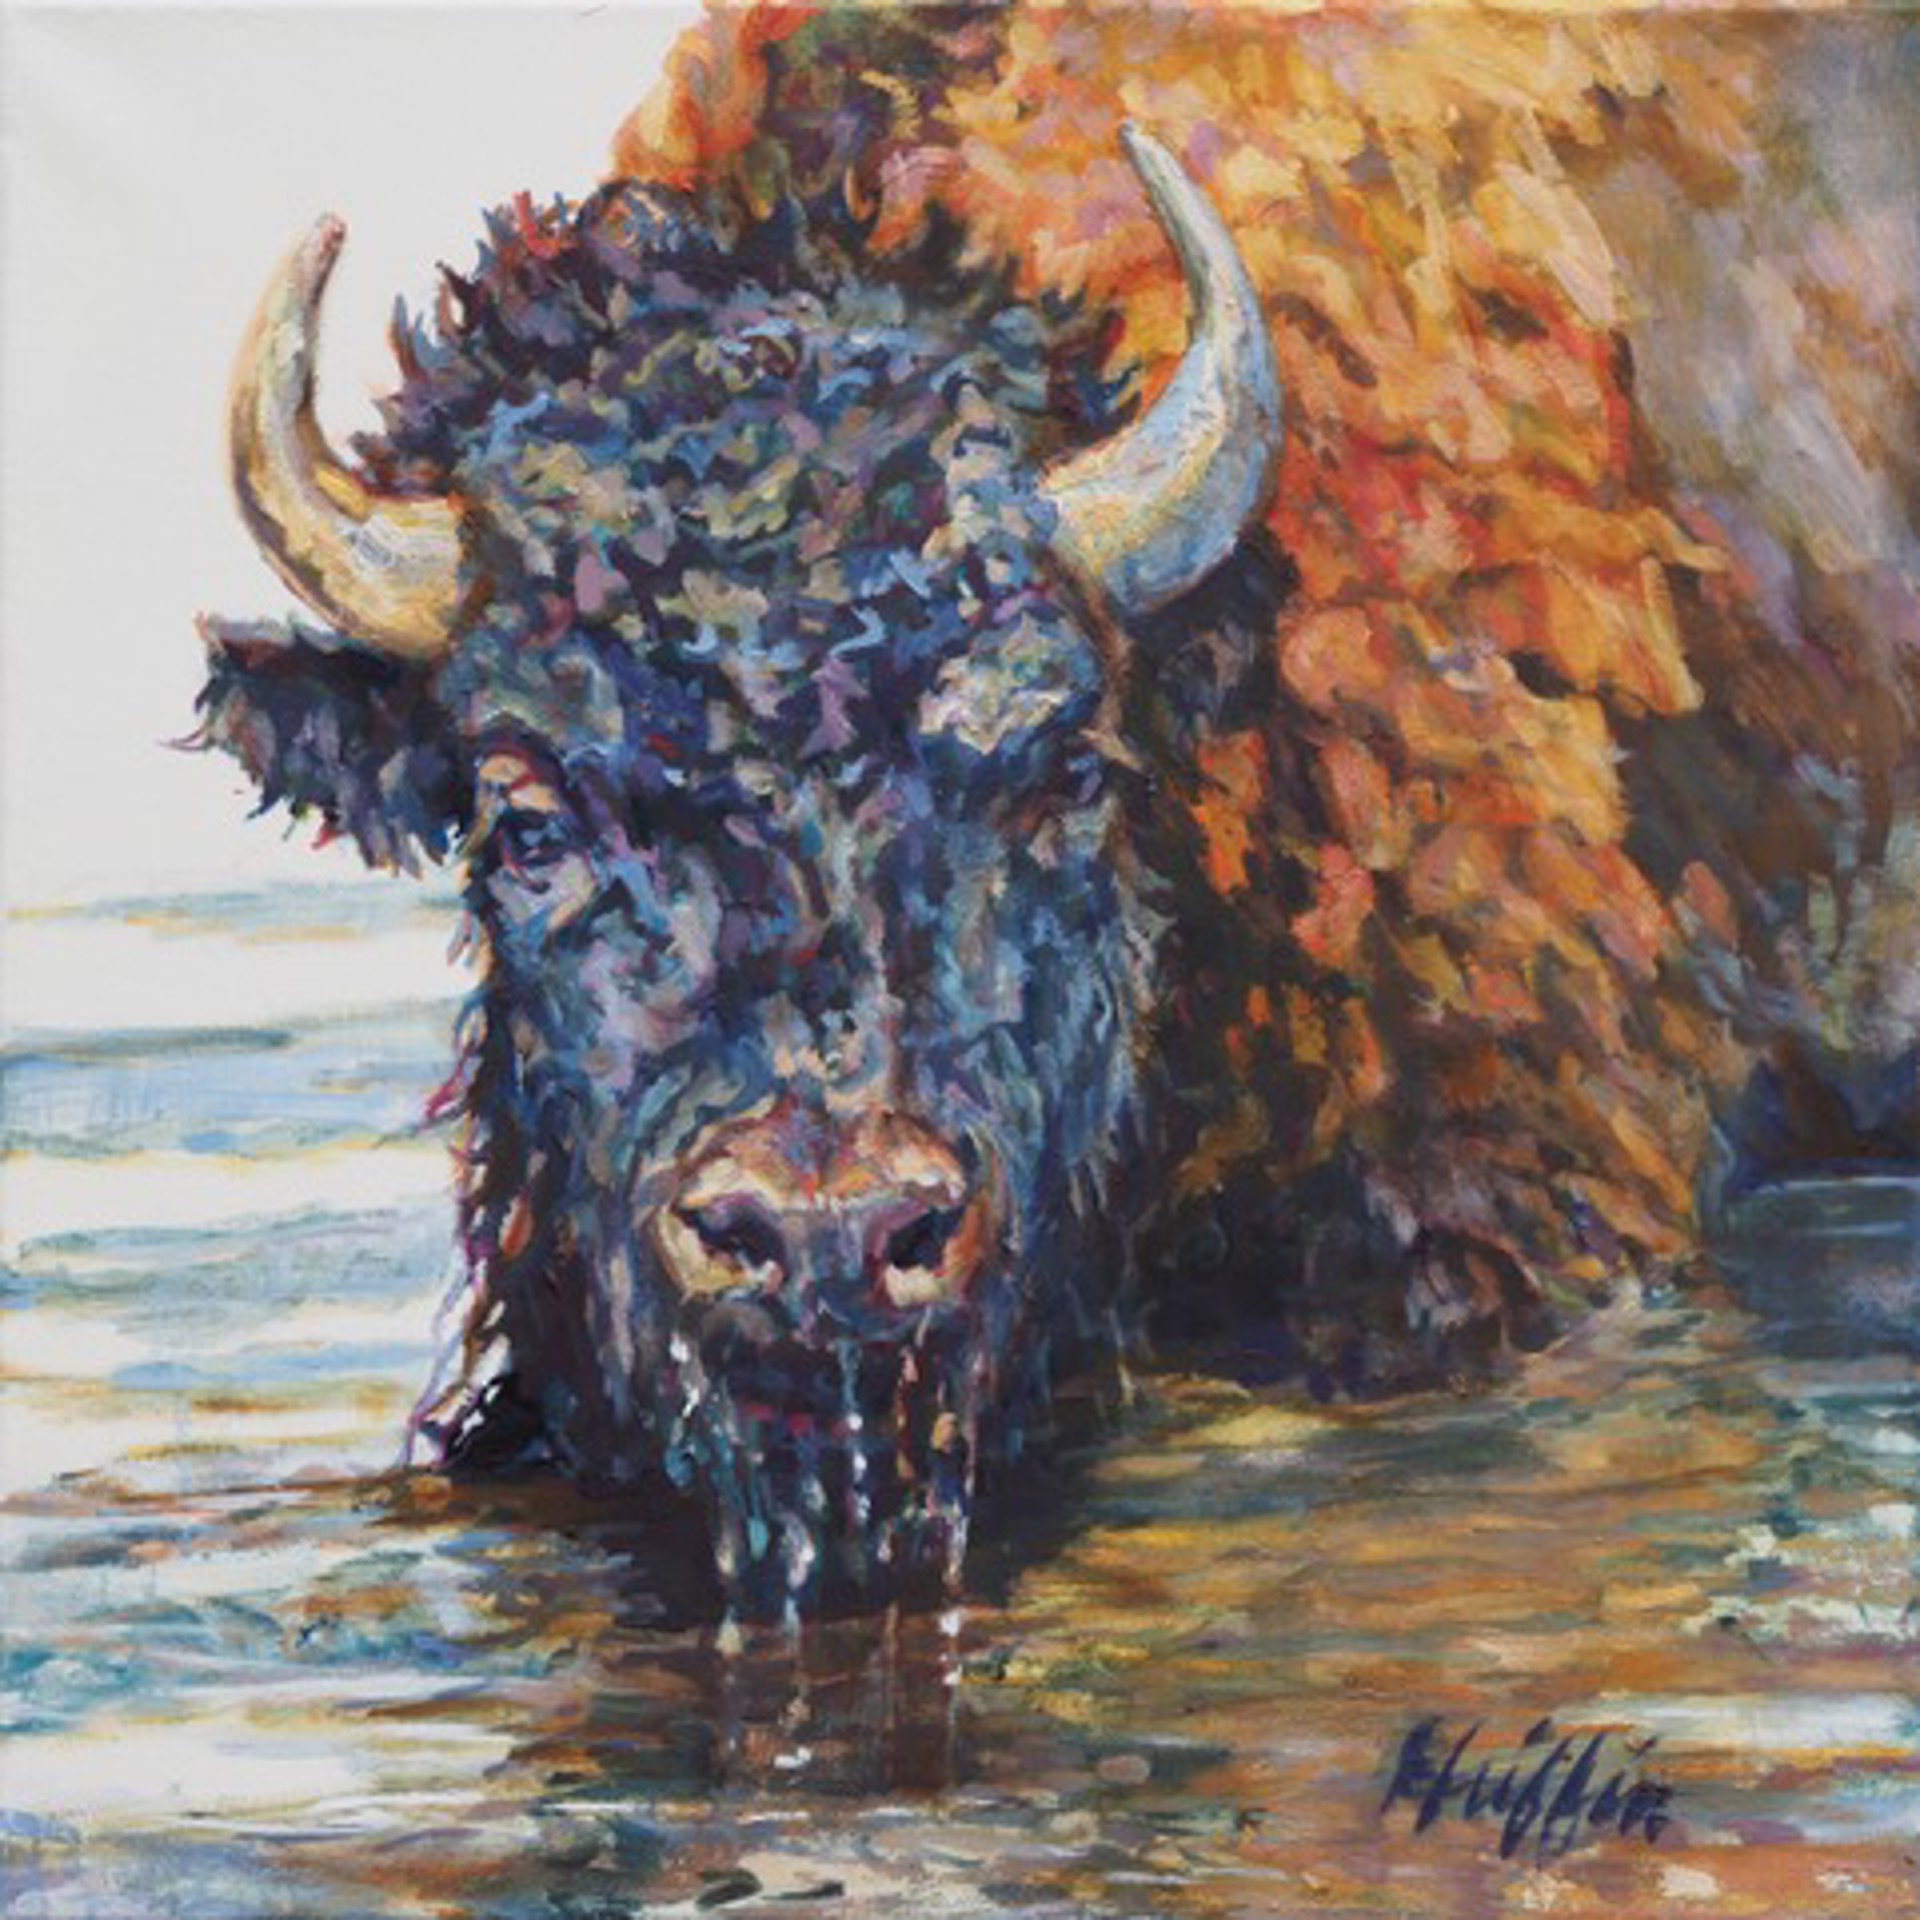 An Original Oil Painting Of A Colorful Bison Face Portrait In The Water, By Patricia Griffin, Available At Gallery Wild